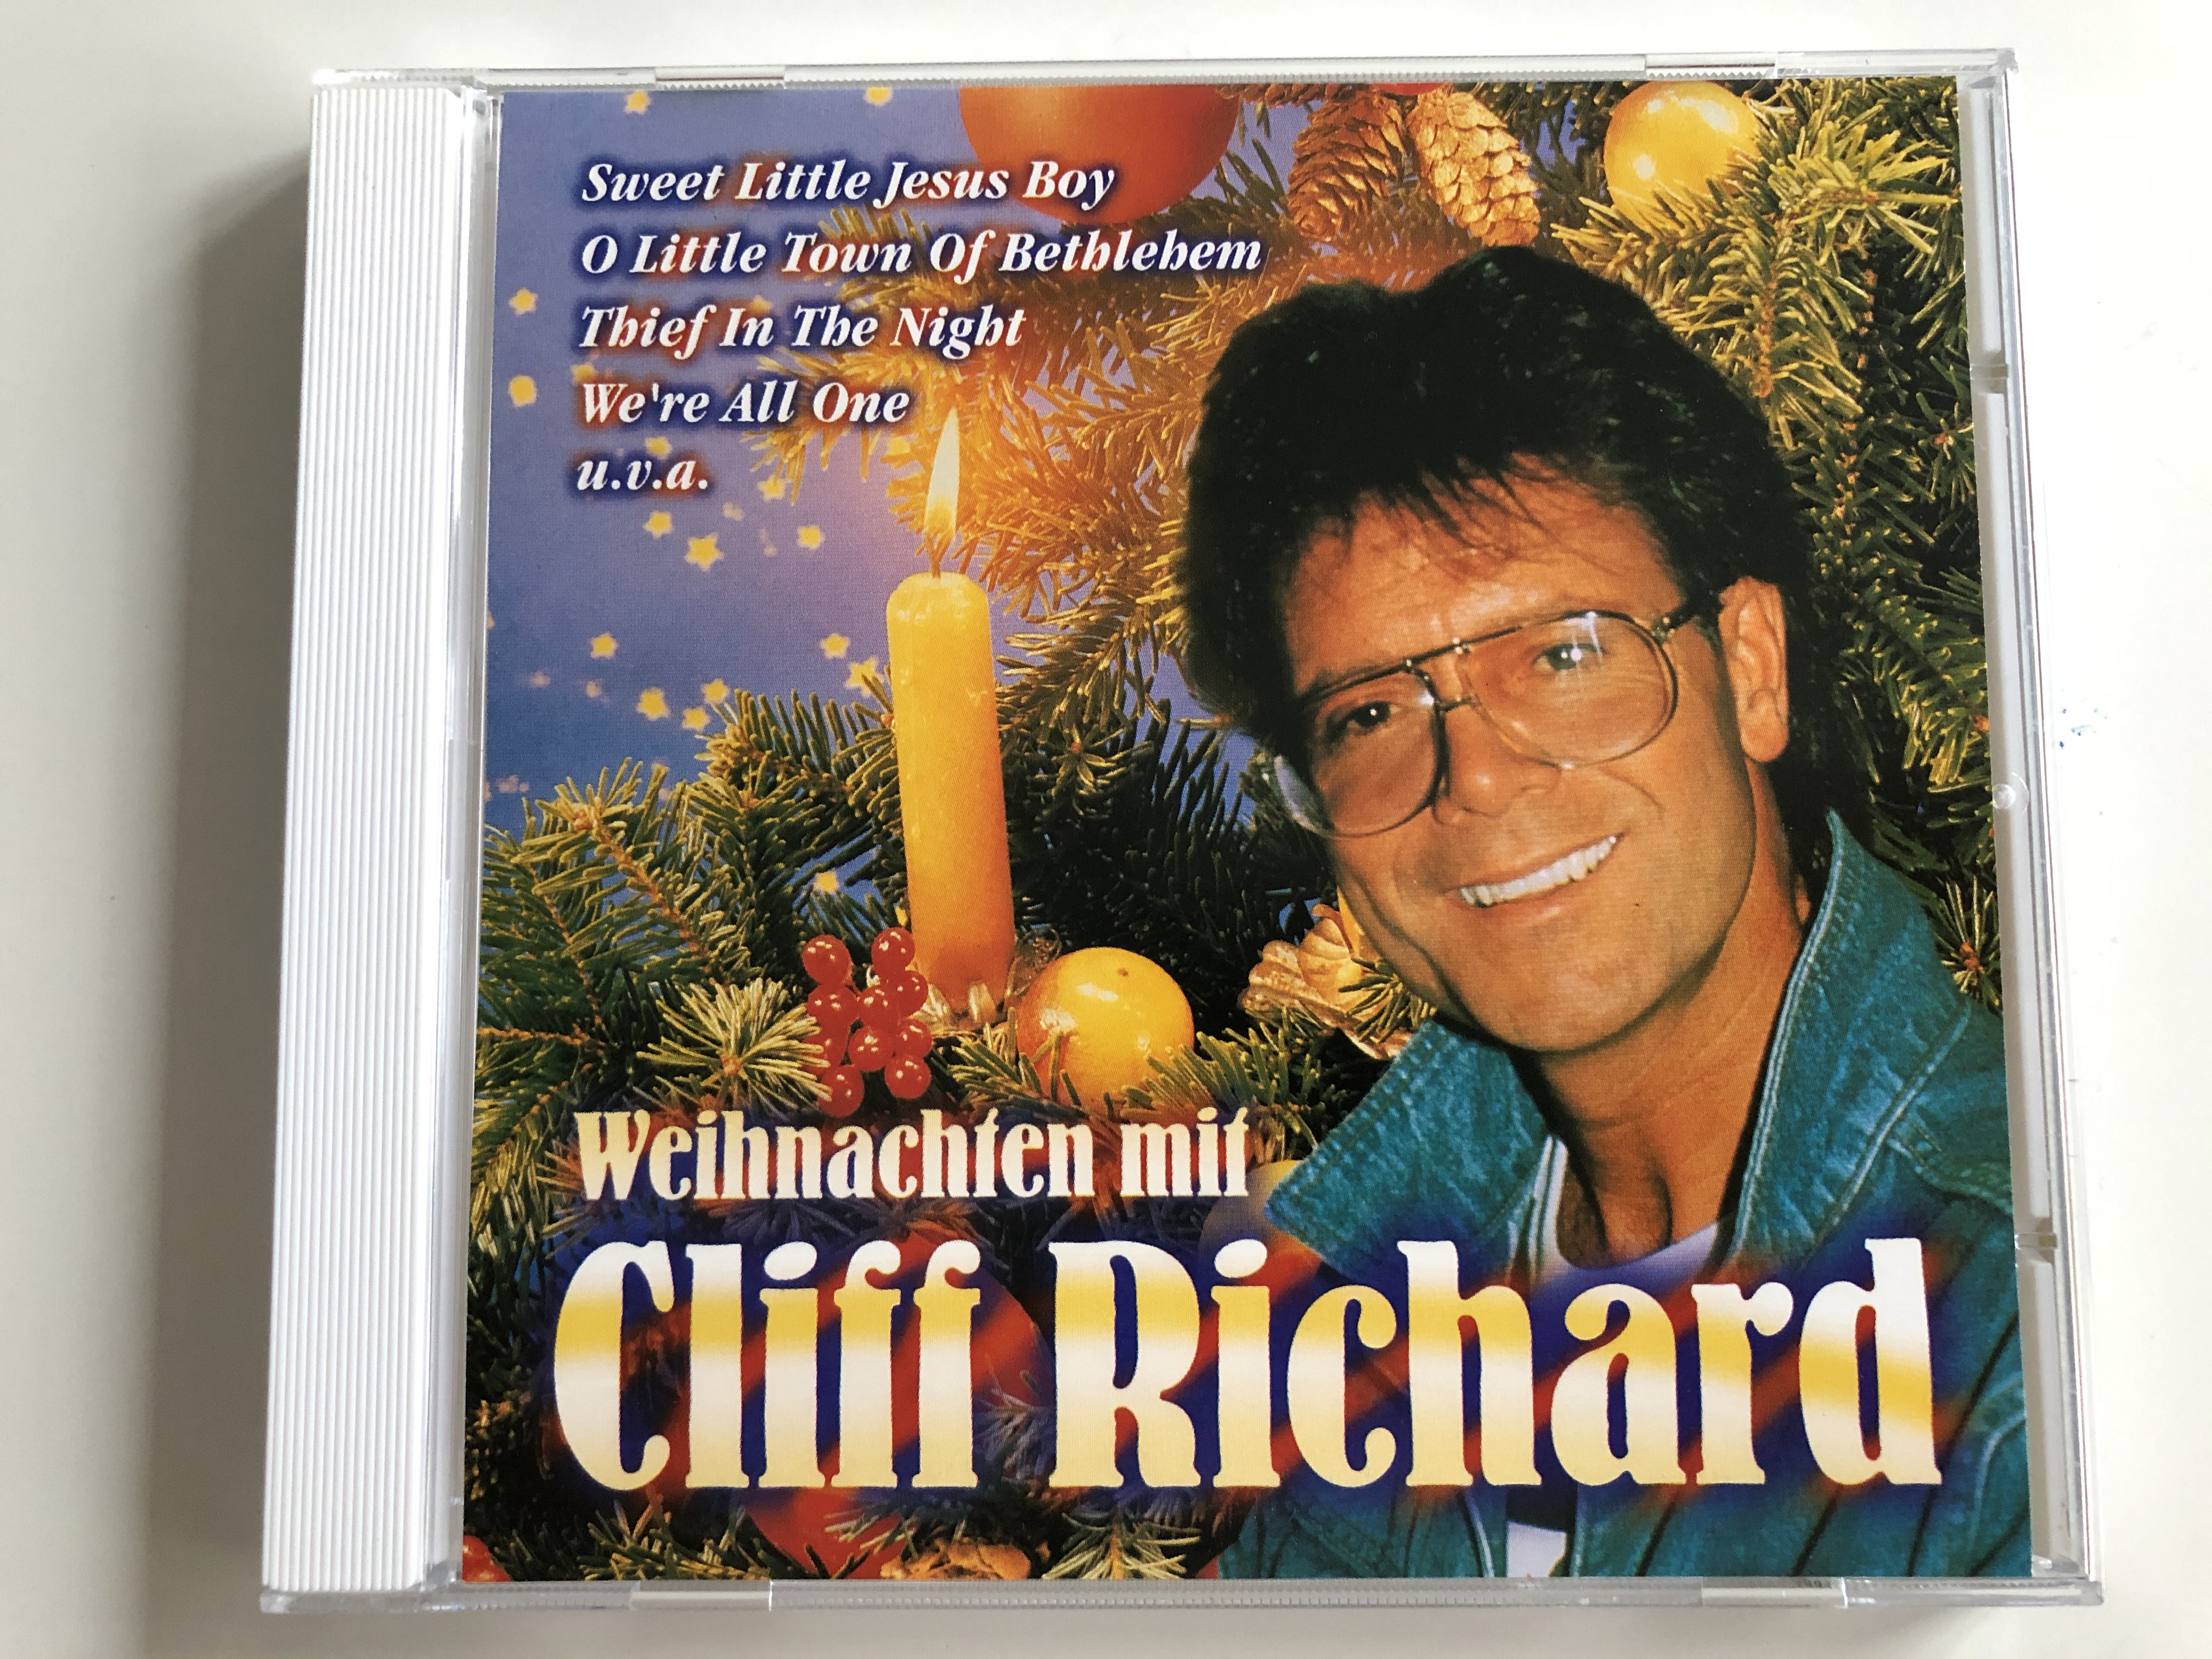 weihnachten-mit-cliff-richard-sweet-little-jesus-boy-o-little-town-of-bethlehem-thief-in-the-night-we-re-all-one-u.v.a.-eurotrend-audio-cd-stereo-cd-157-1-.jpg